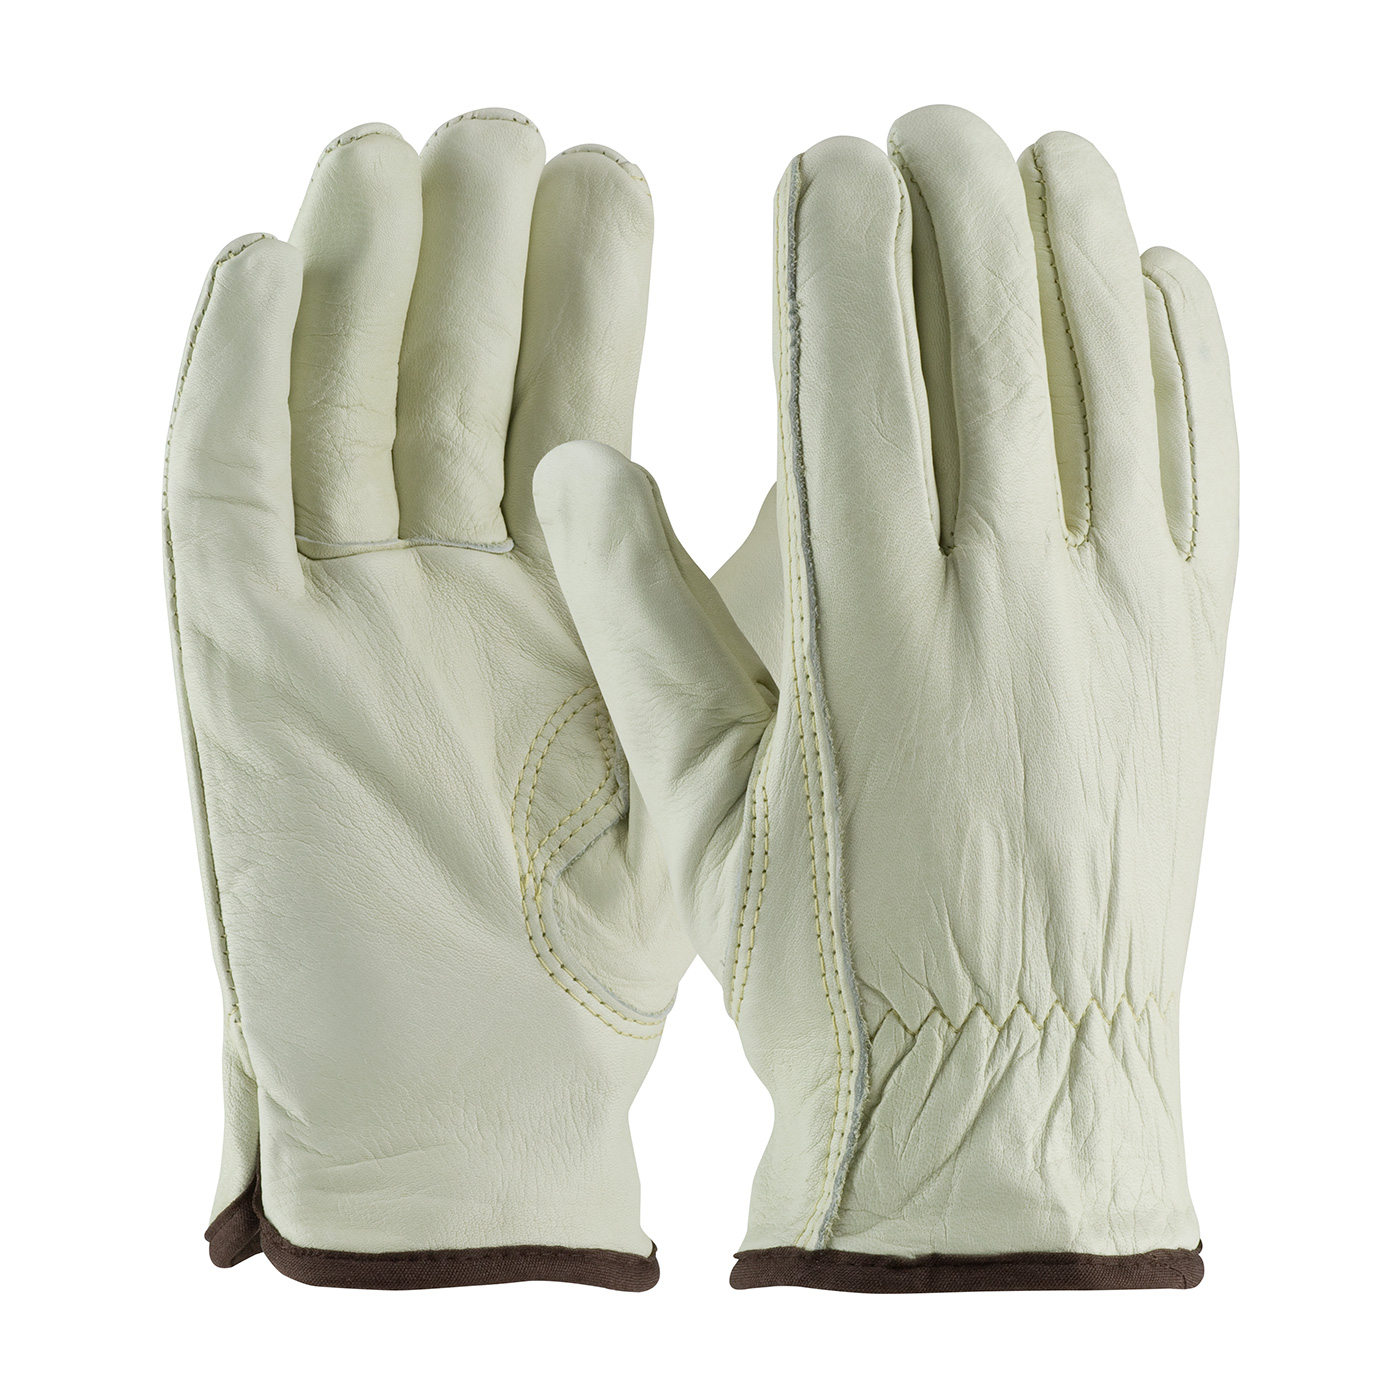 Thermal Lined Cowhide Winter Drivers Gloves | Thermal Lined Leather ...